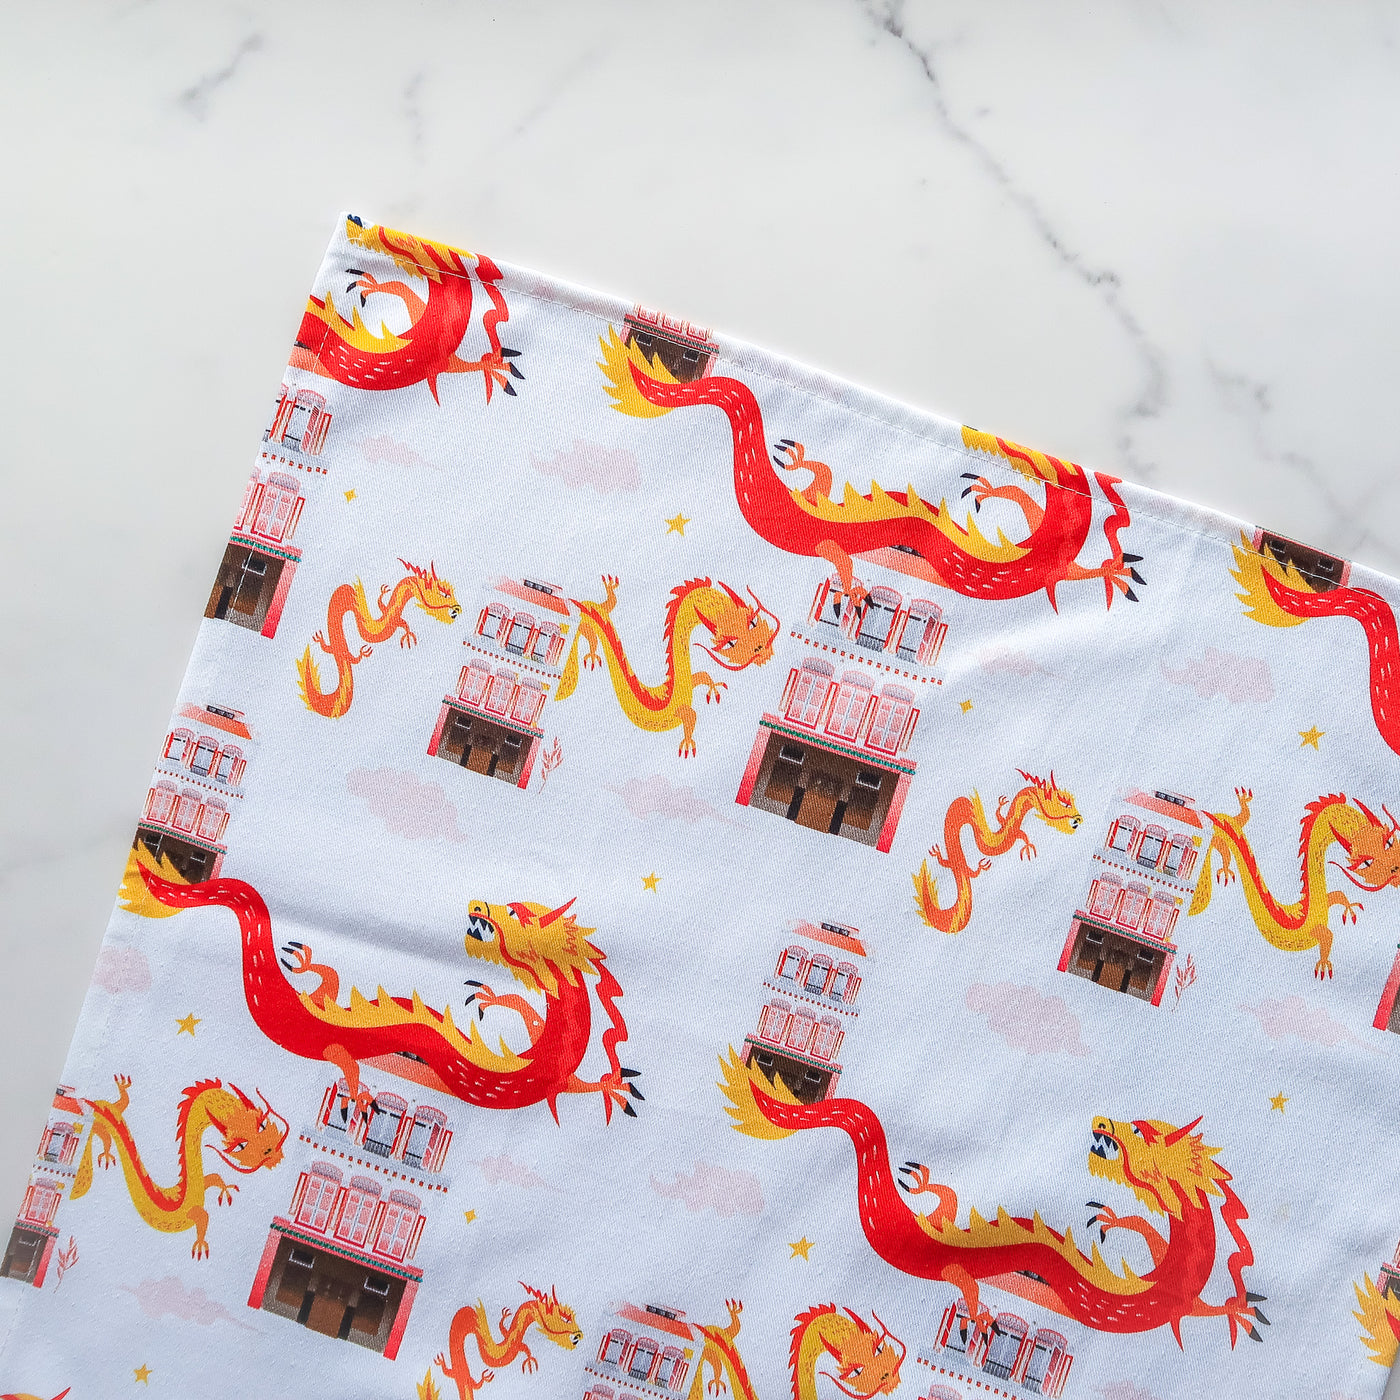 Singapore Shophouse CNY Year of the Dragon Tea Towel - Red